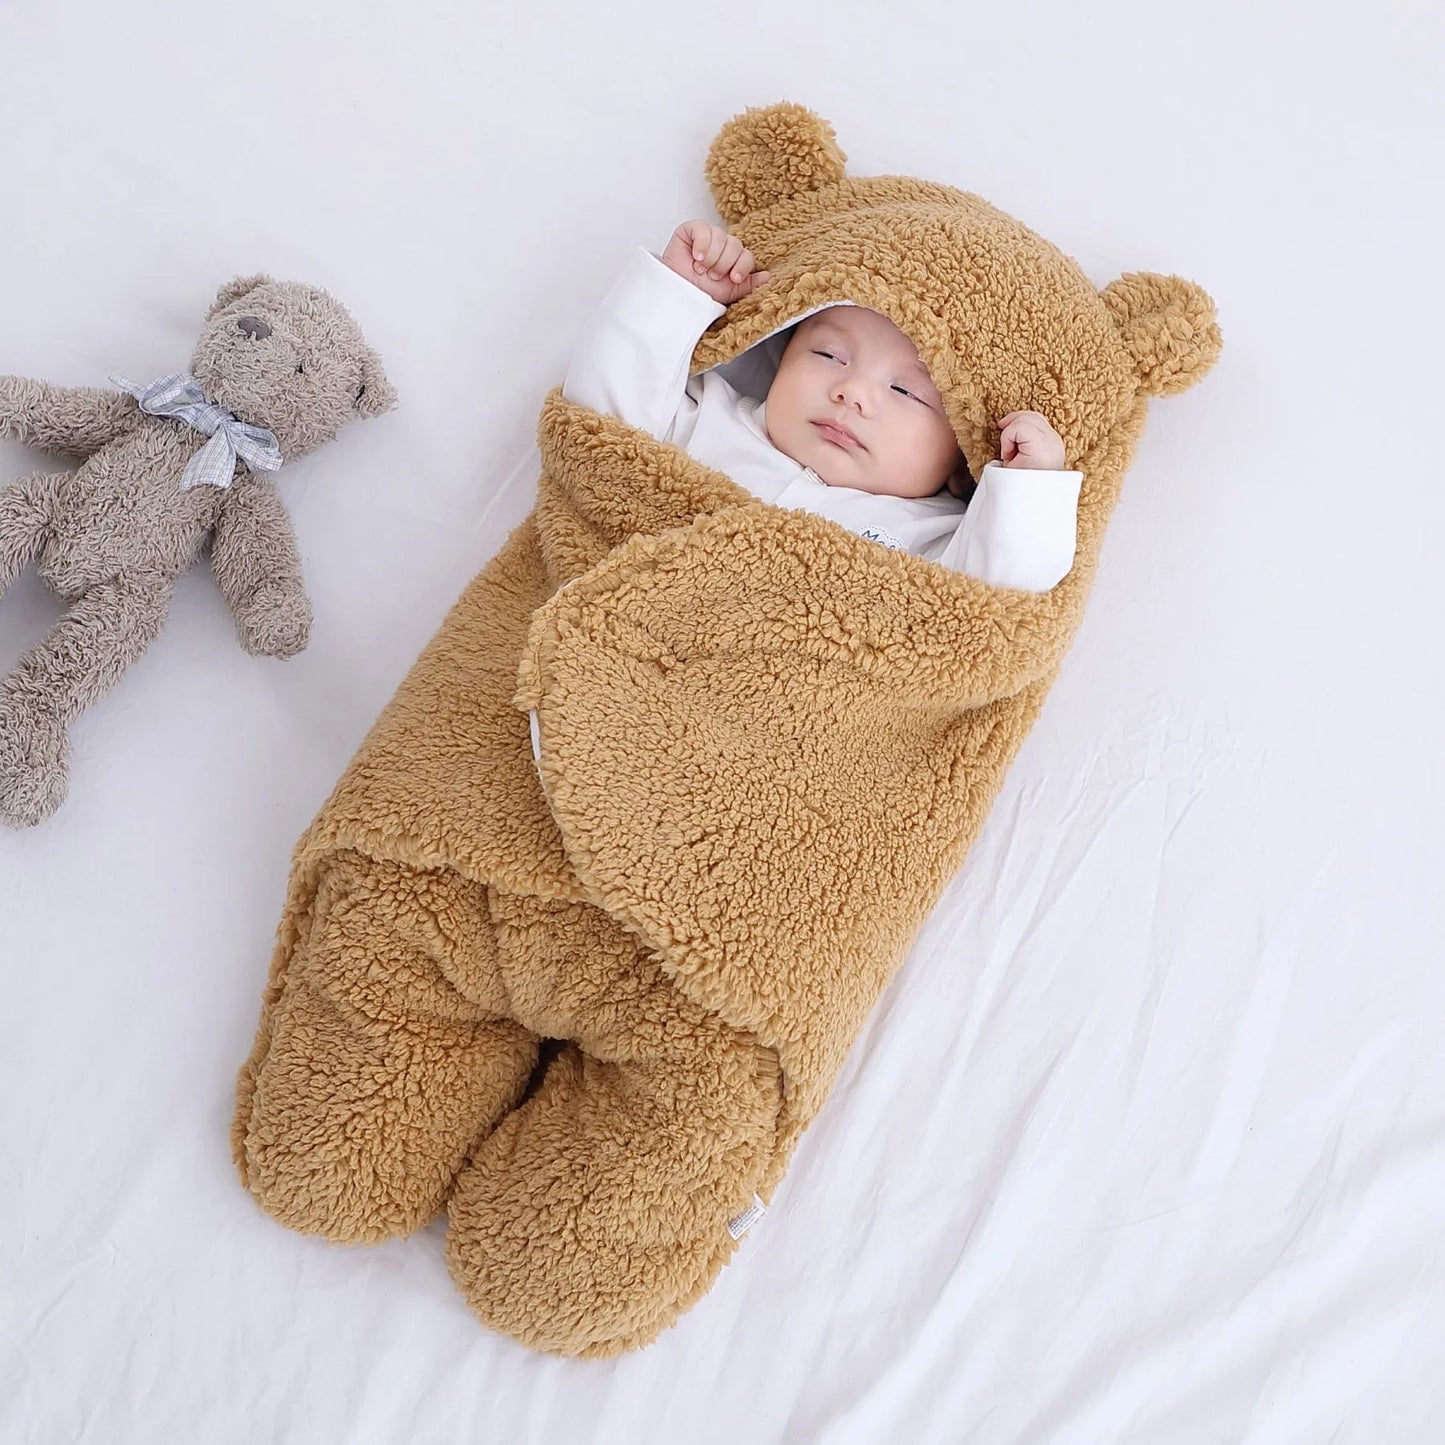 Cute and cuddly Khaki brown baby bear blanket with baby wrapped up cozy with arms outstretched versatile for baby's temperature comfort 